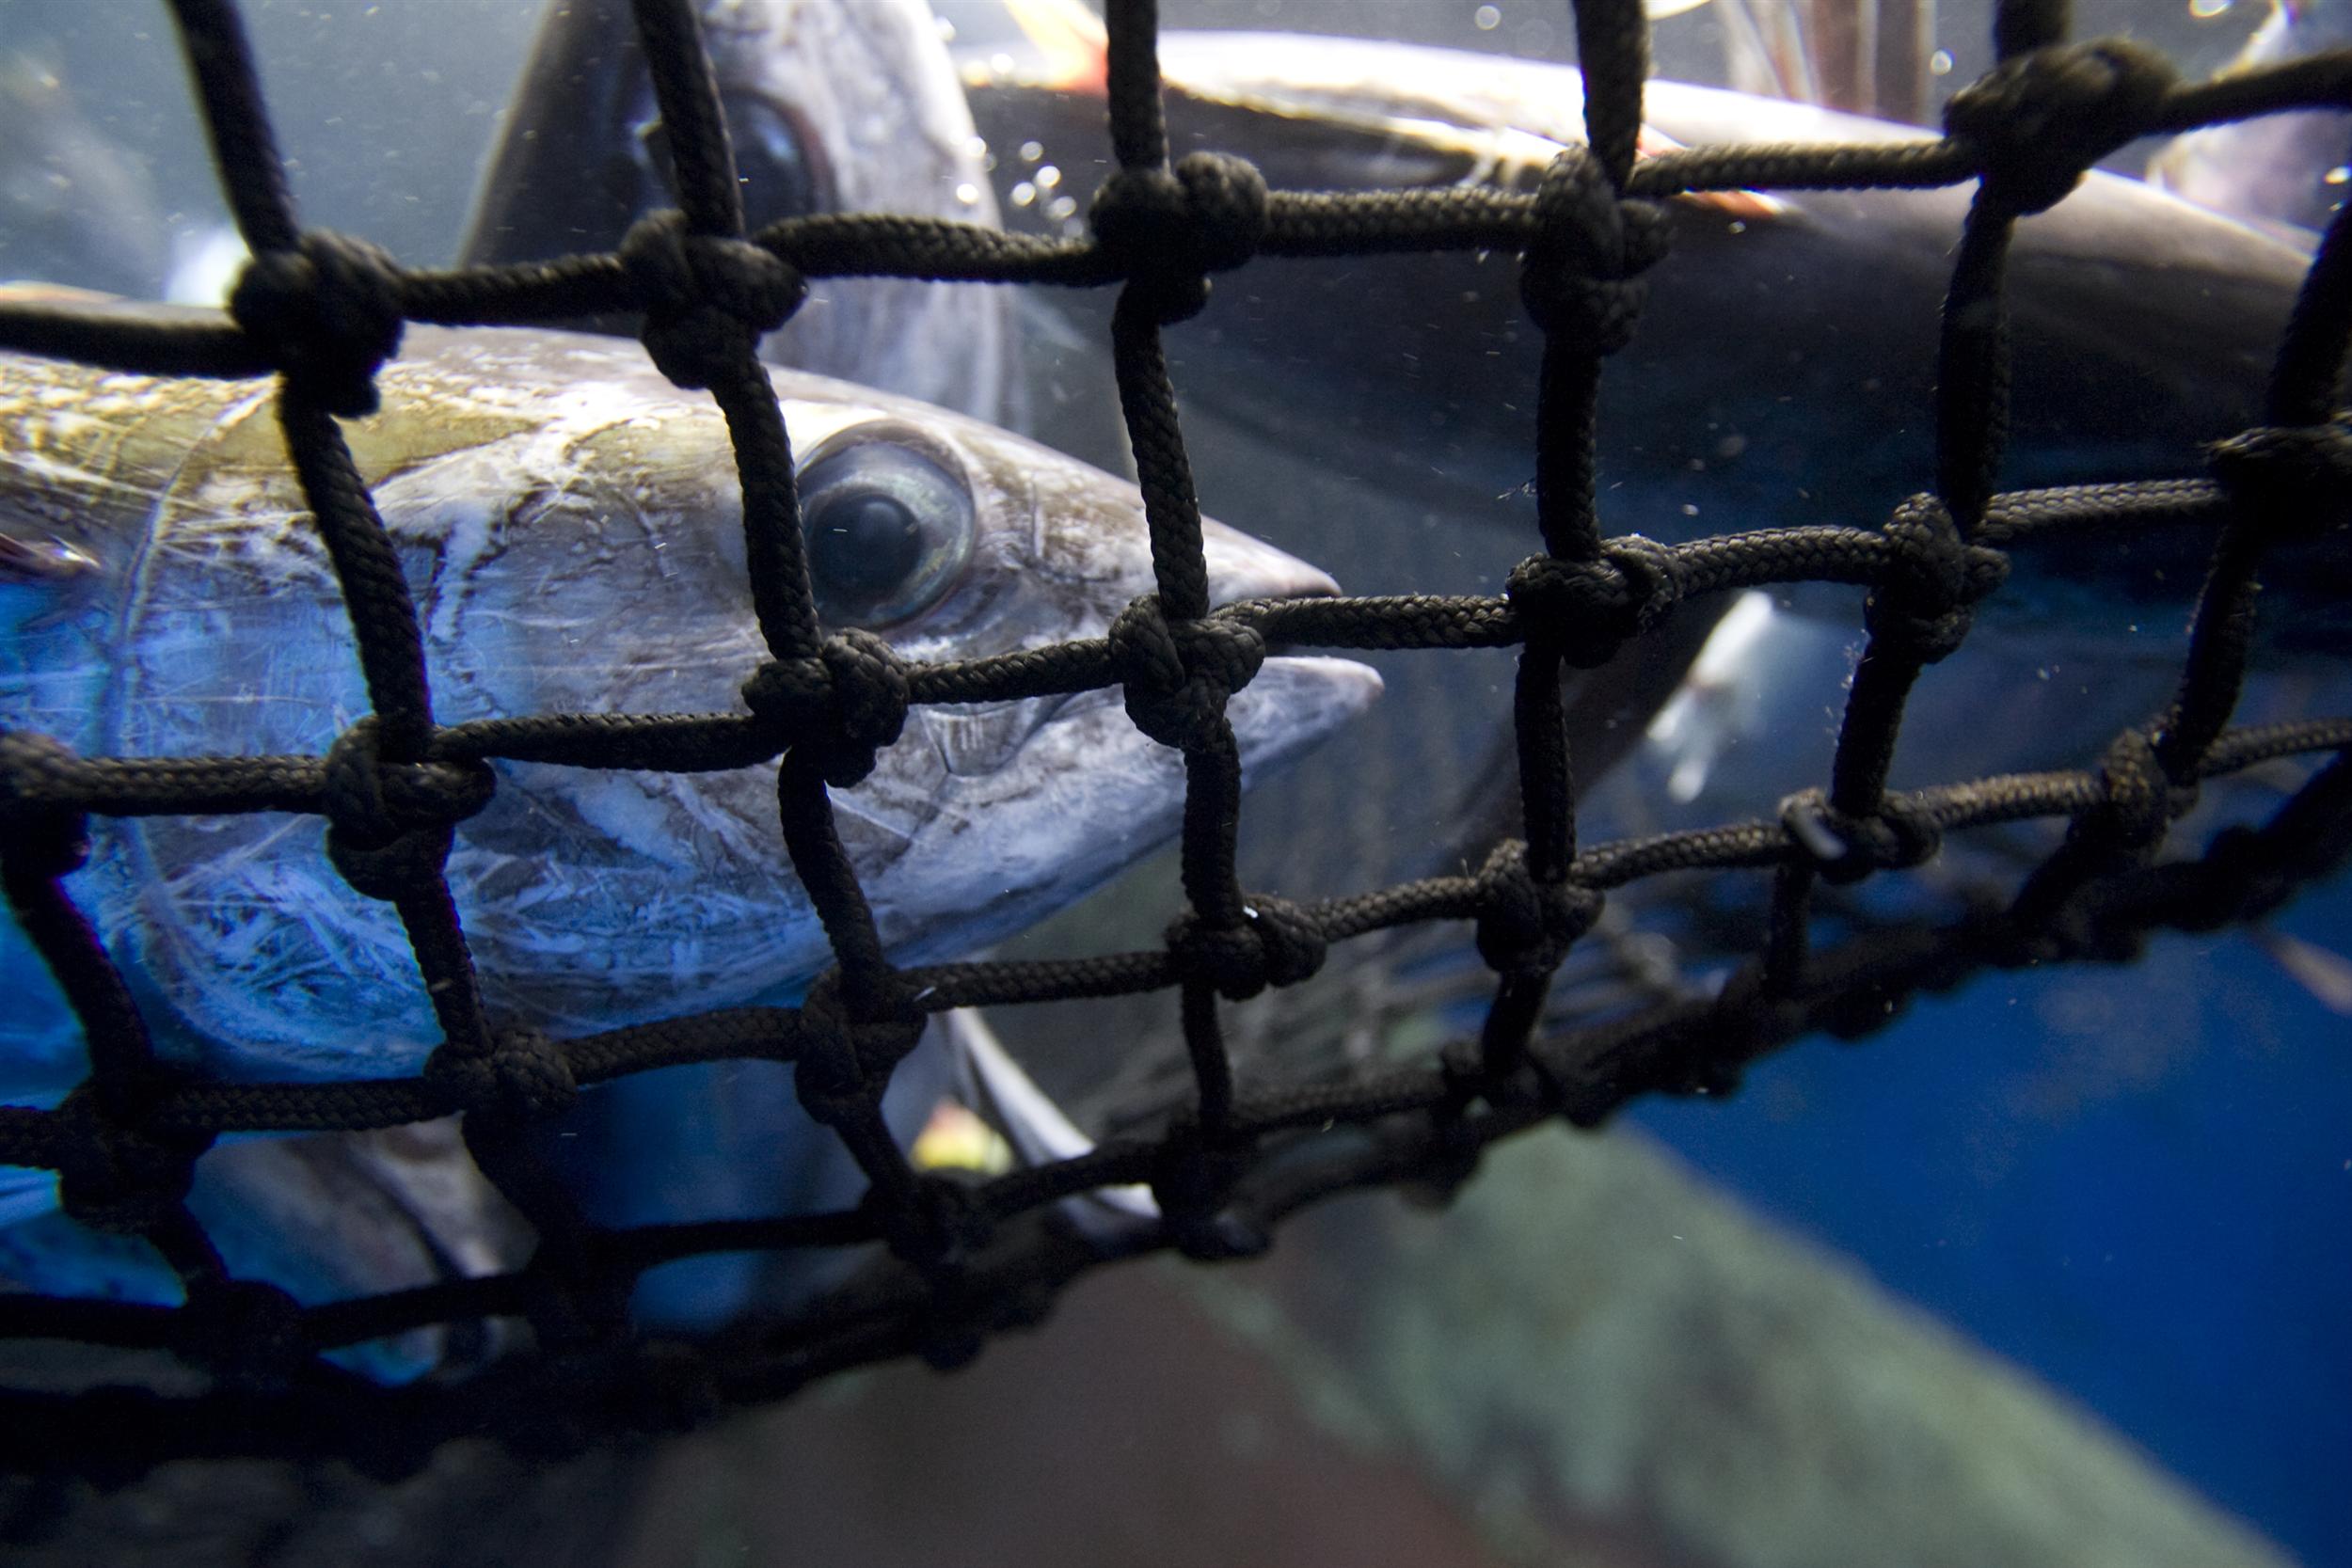 A fish looks through a fishing net with a wide eye.